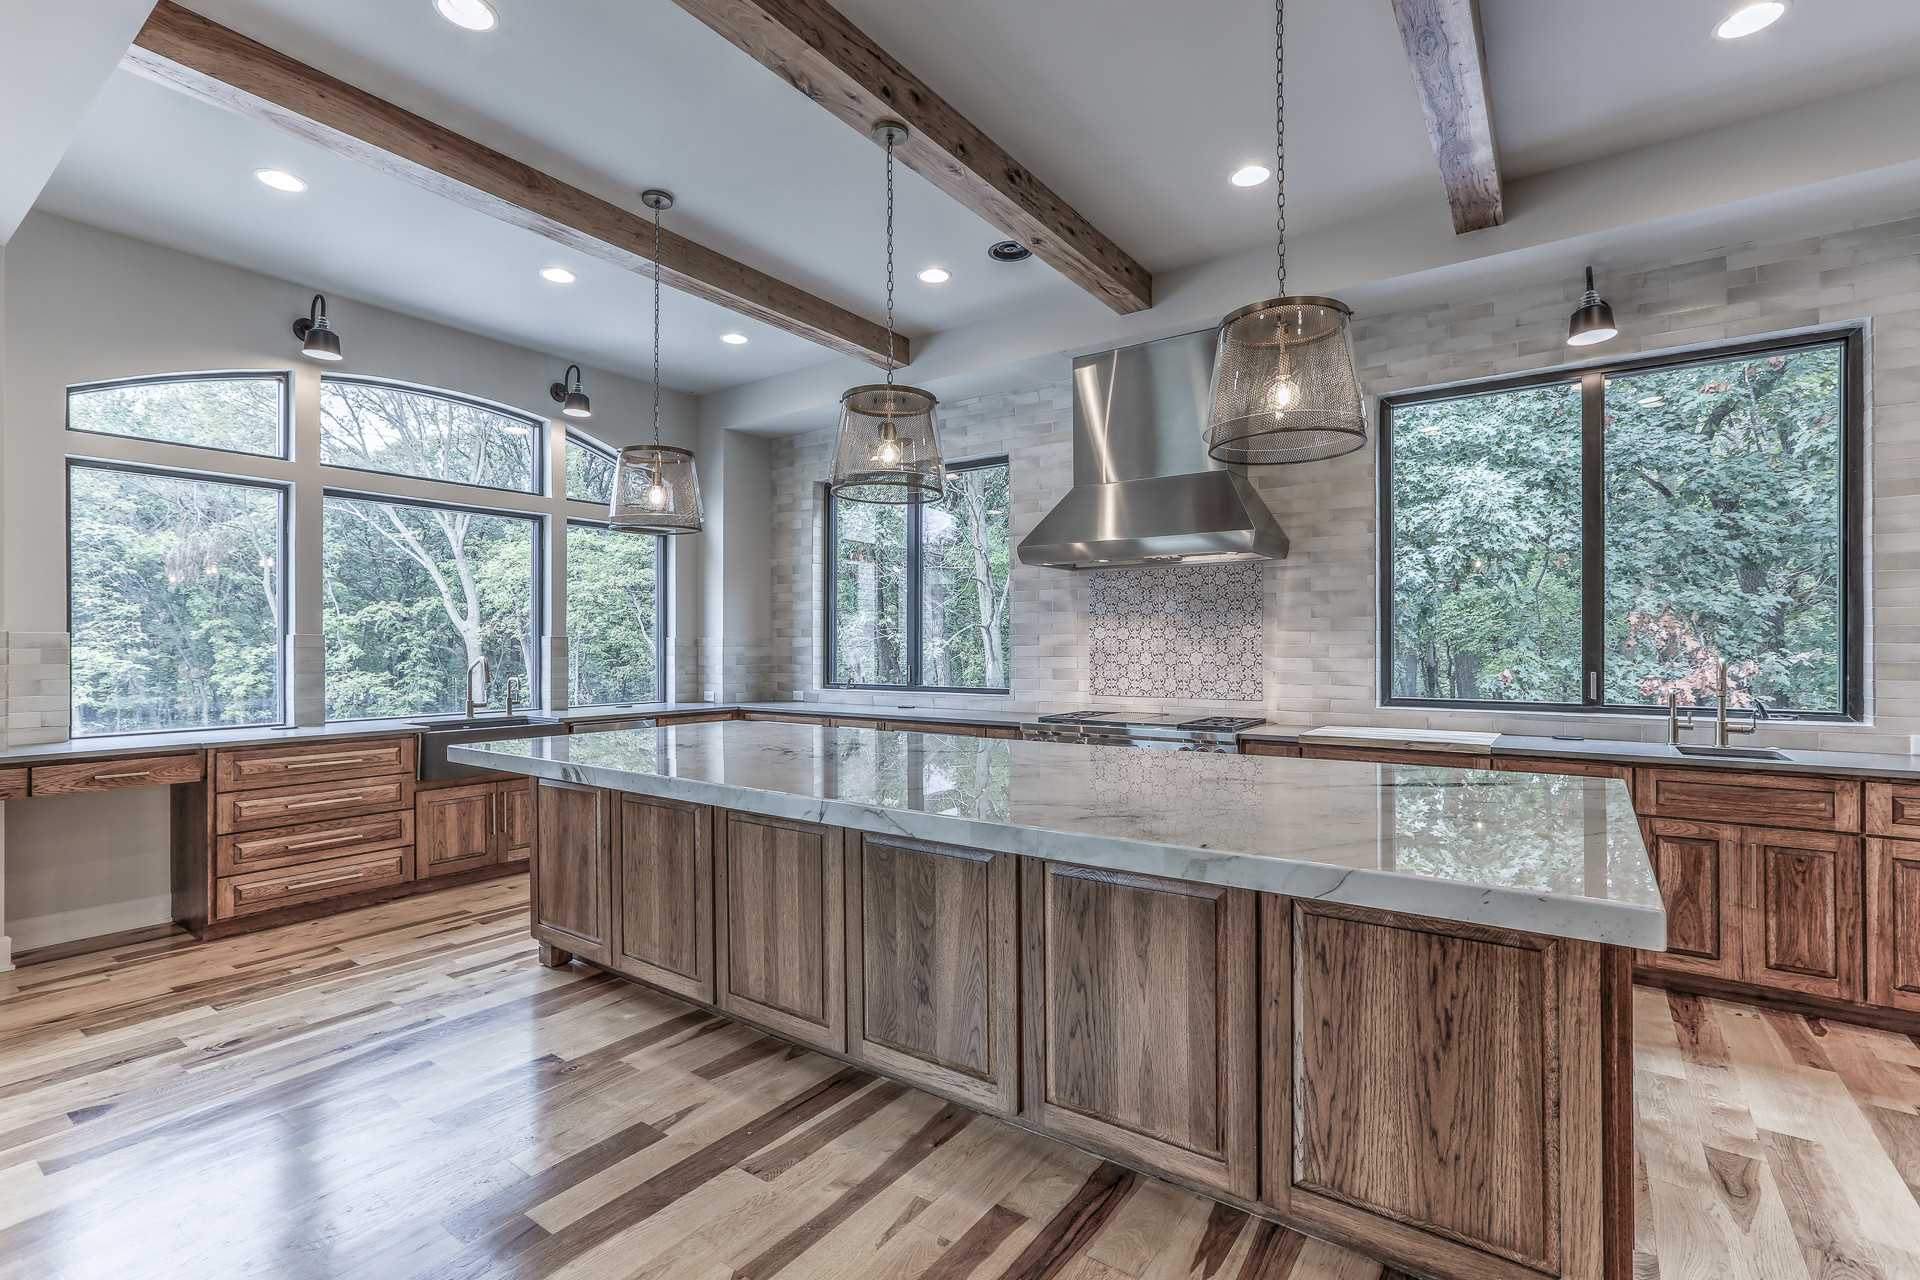 Inspiration for a rustic kitchen remodel in Omaha